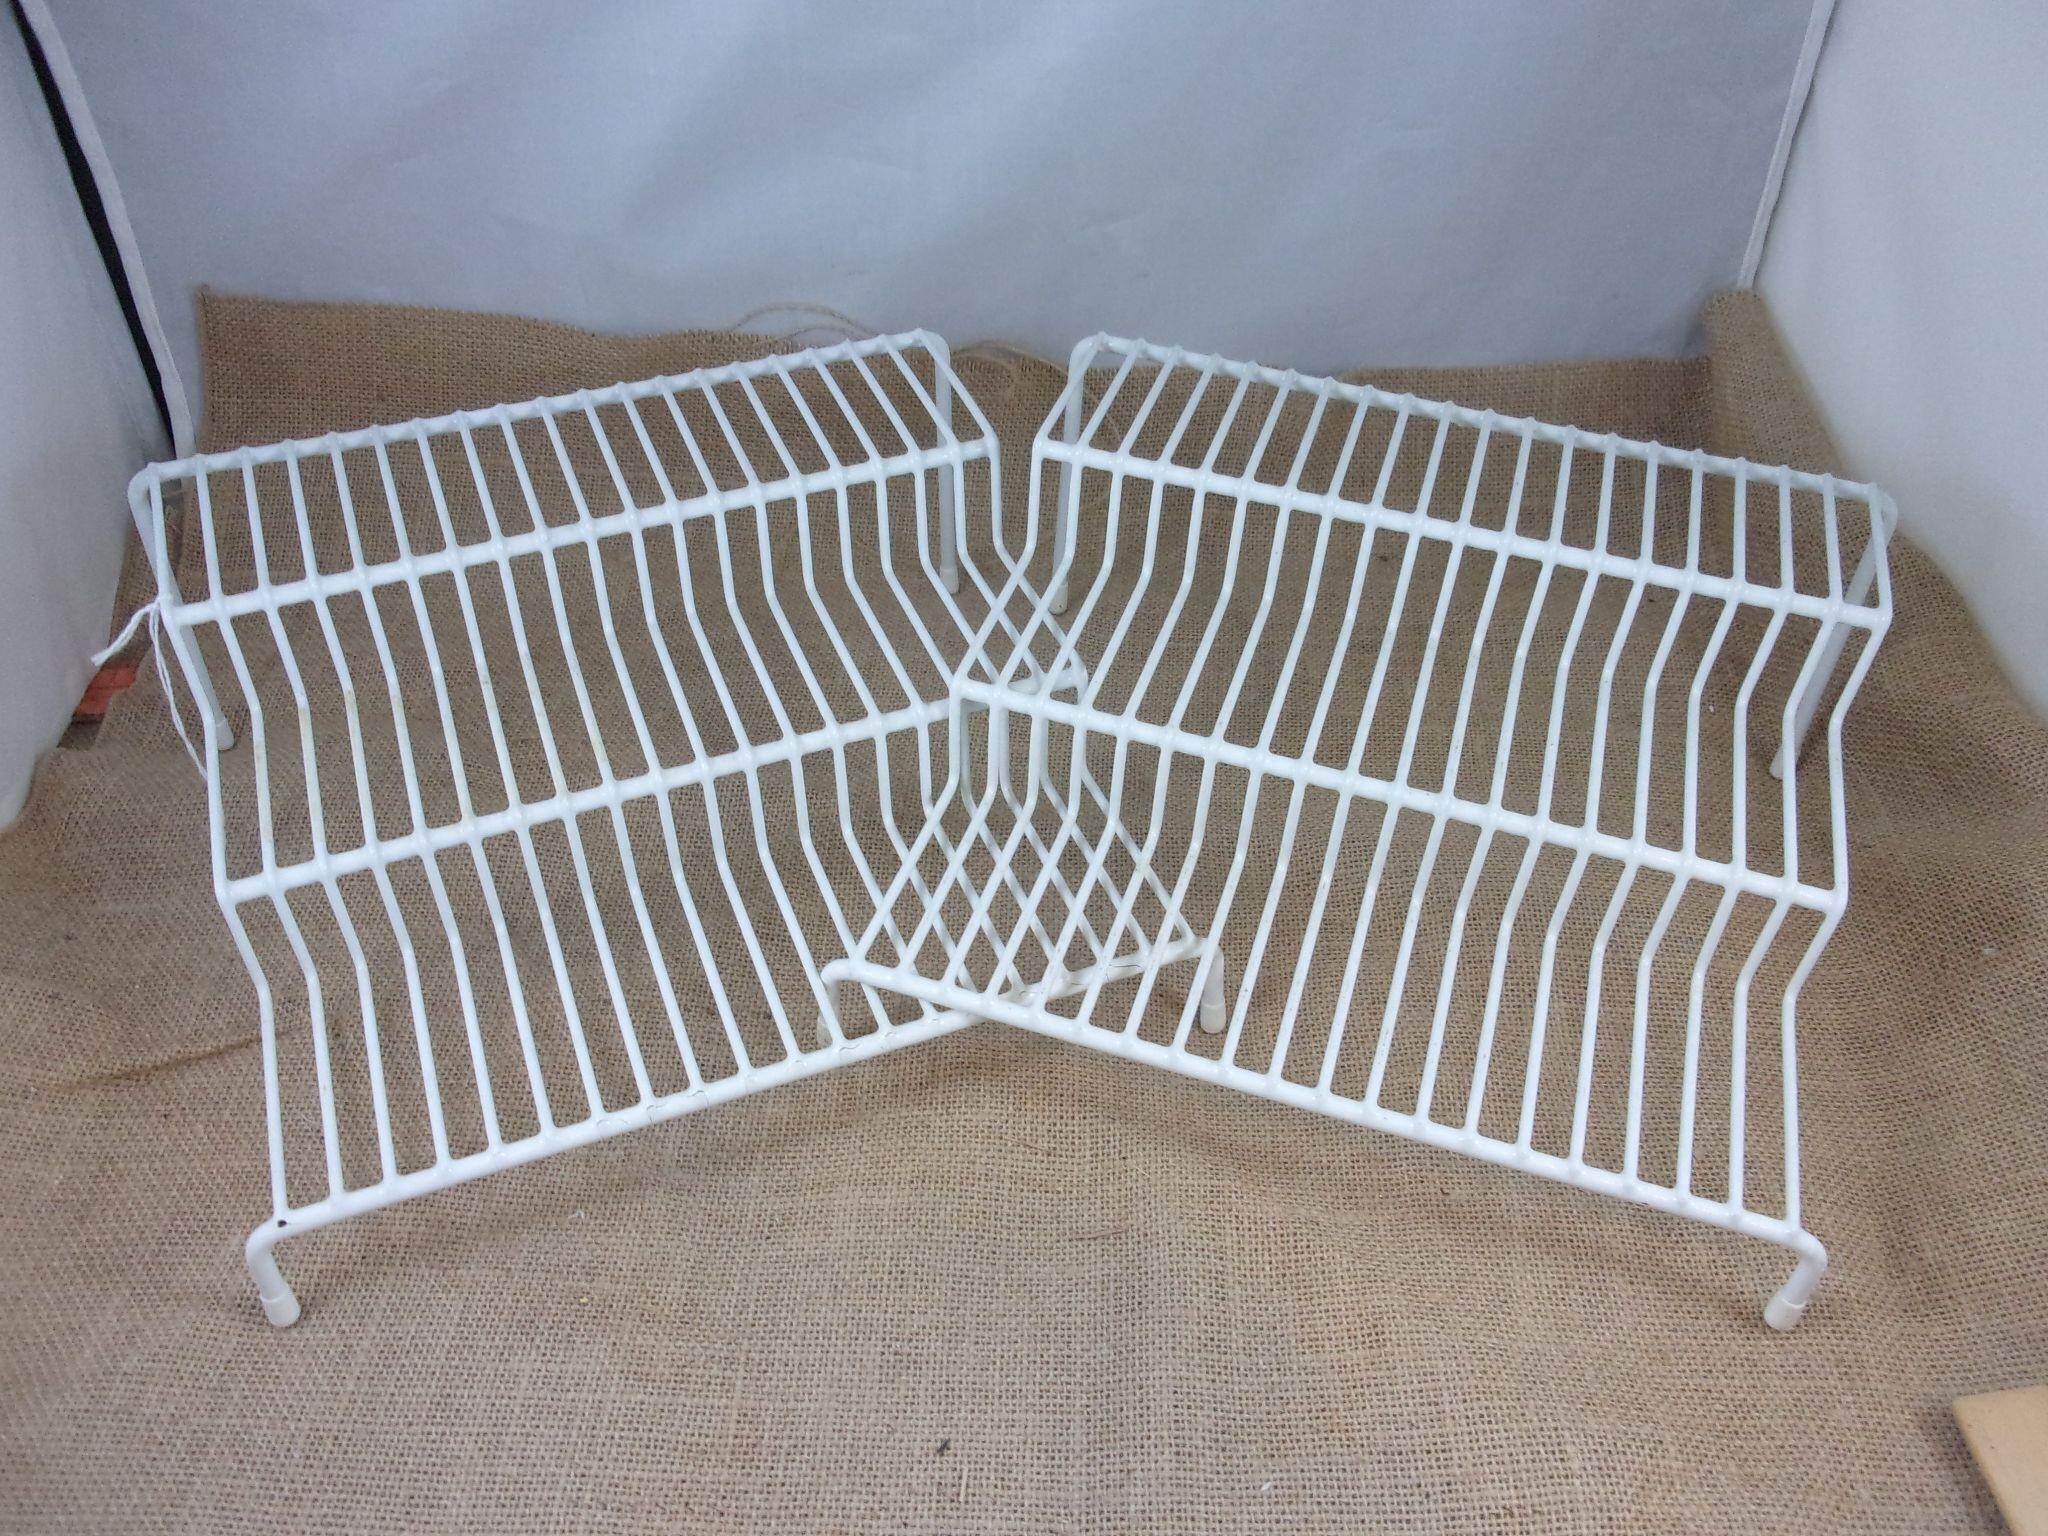 White Wire Displays, 3 Tier - Lot of 2